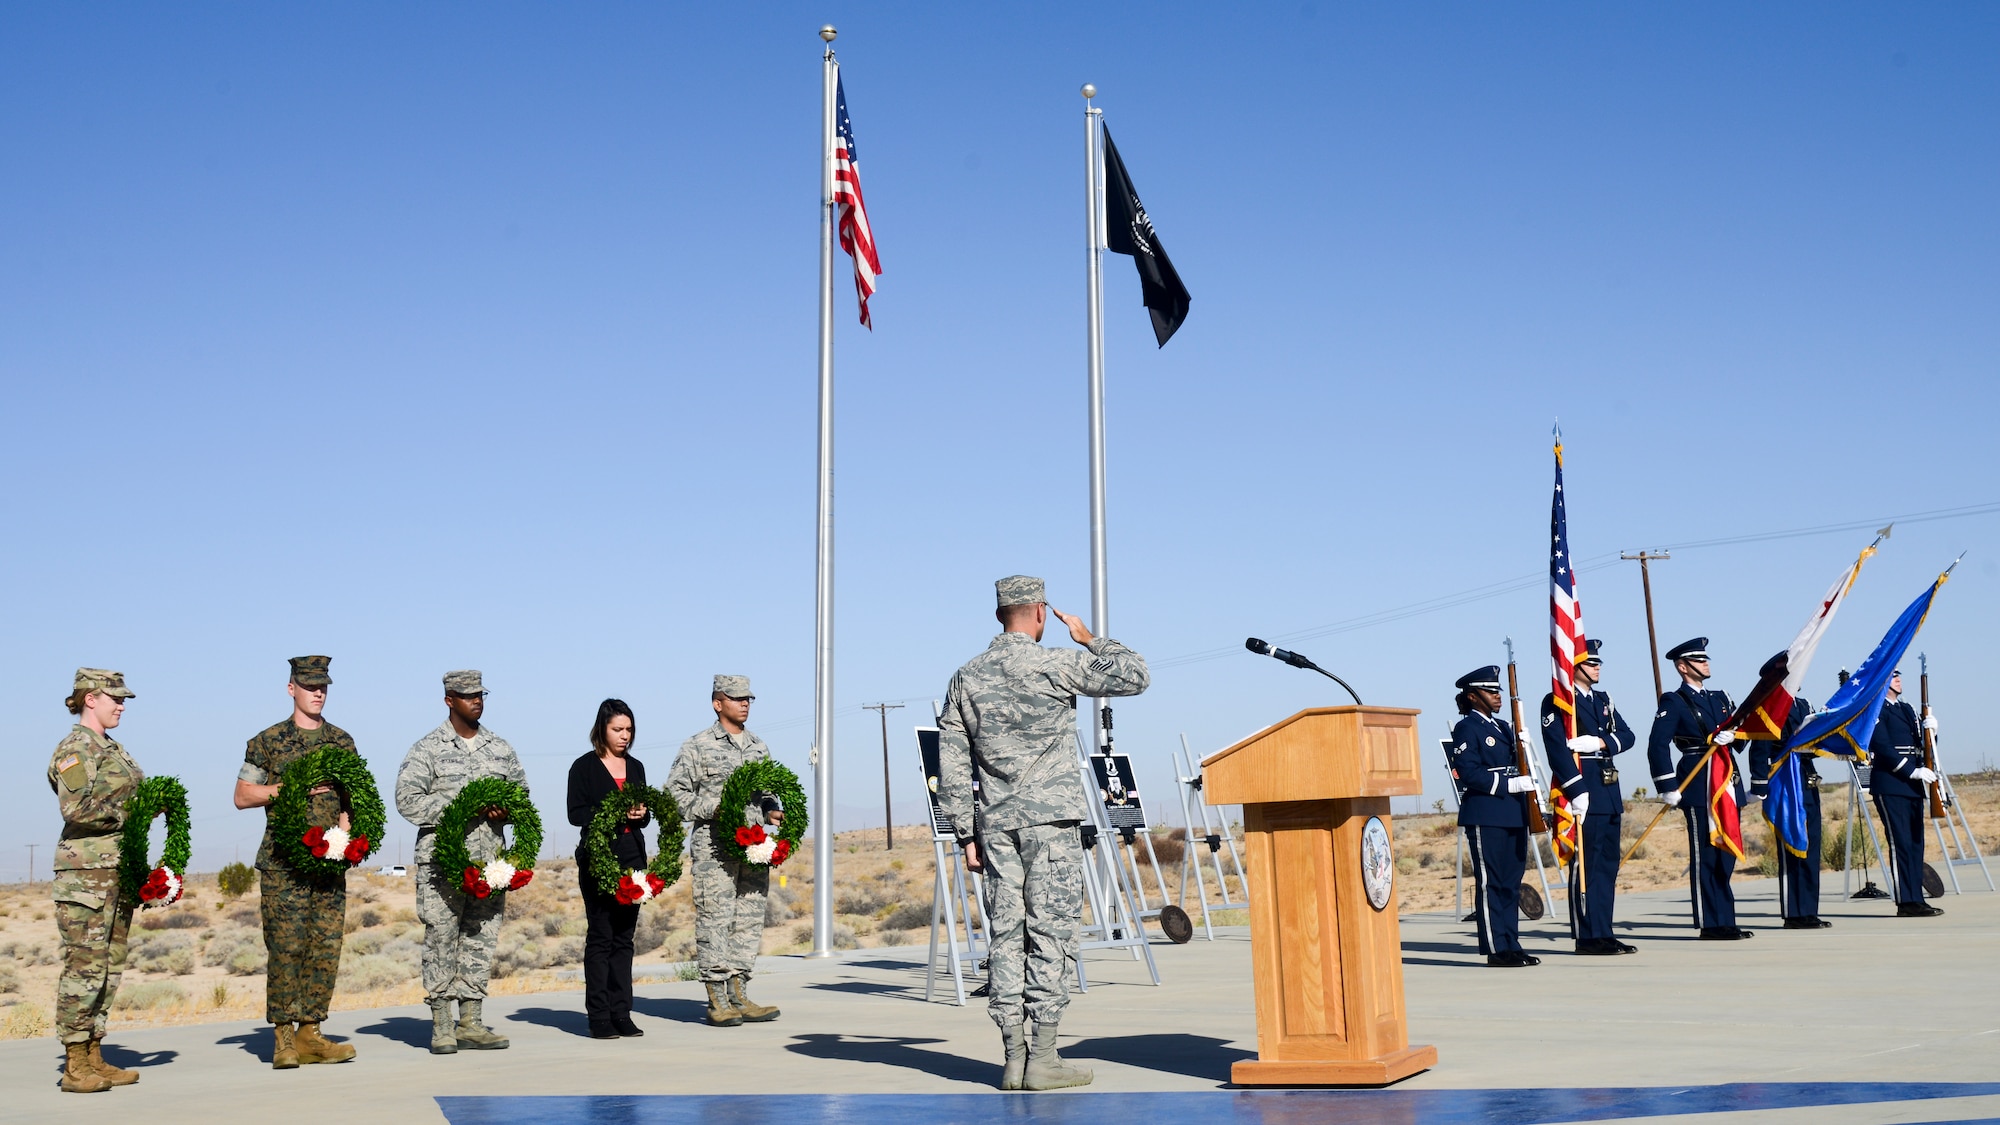 Edwards personnel render honors to the Nation’s flag during a wreath-laying ceremony commemorating National POW/MIA Recognition Day at the Airman Leadership School Drill Pad at Edwards Air Force Base, California, Sept. 21. (U.S. Air Force photo by Giancarlo Casem)